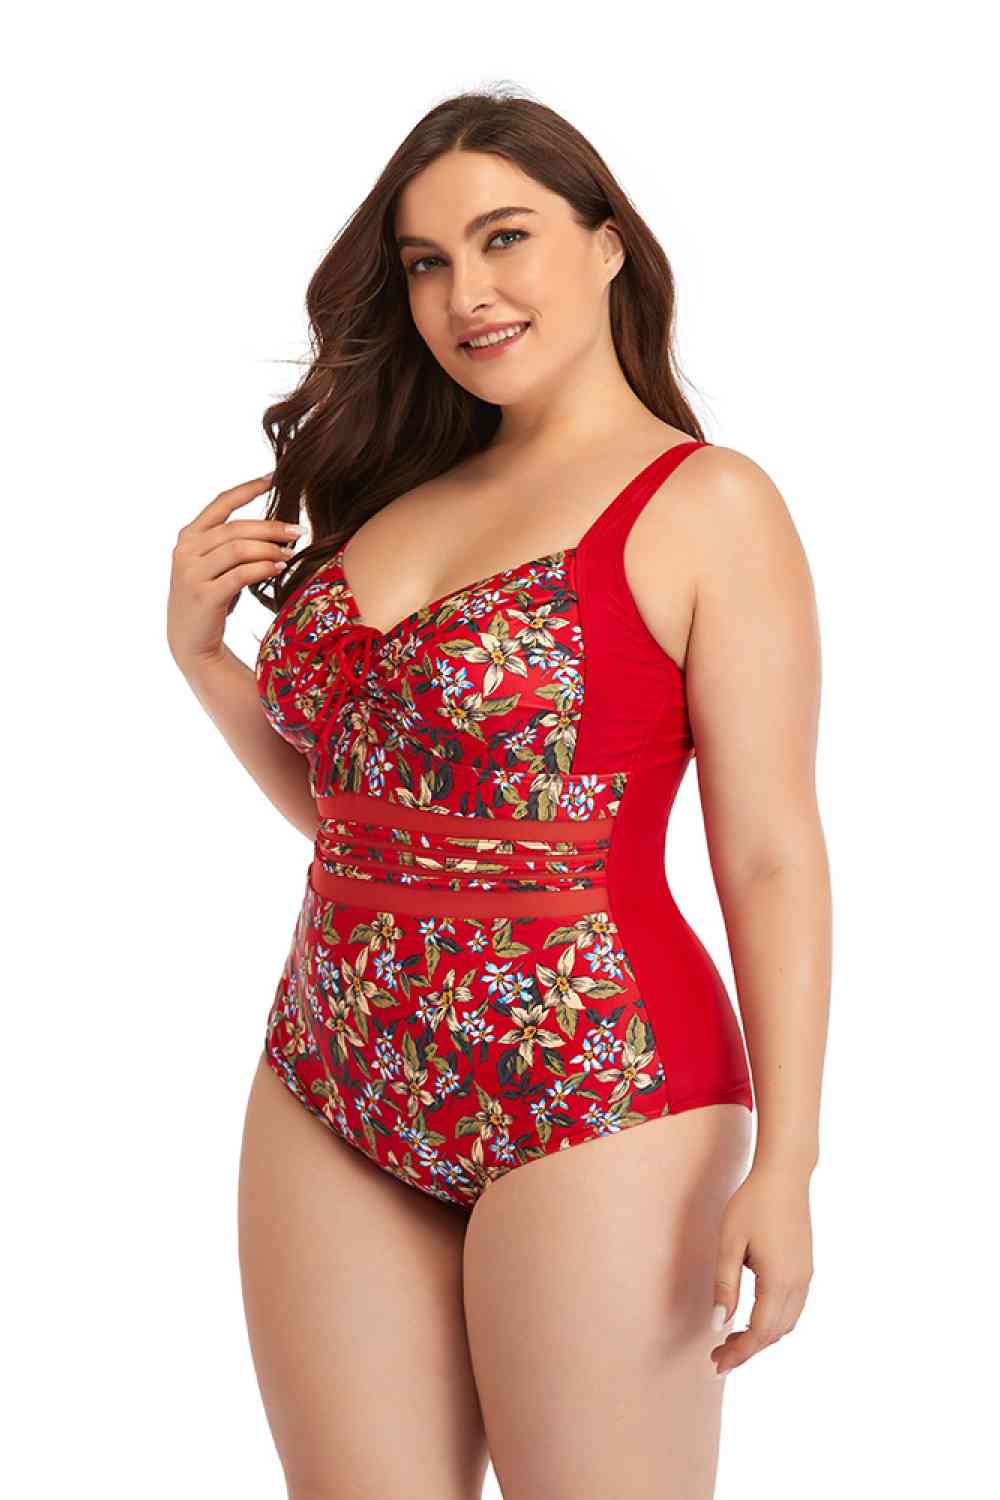 Floral Drawstring Detail One-Piece Swimsuit - Crazy Like a Daisy Boutique #